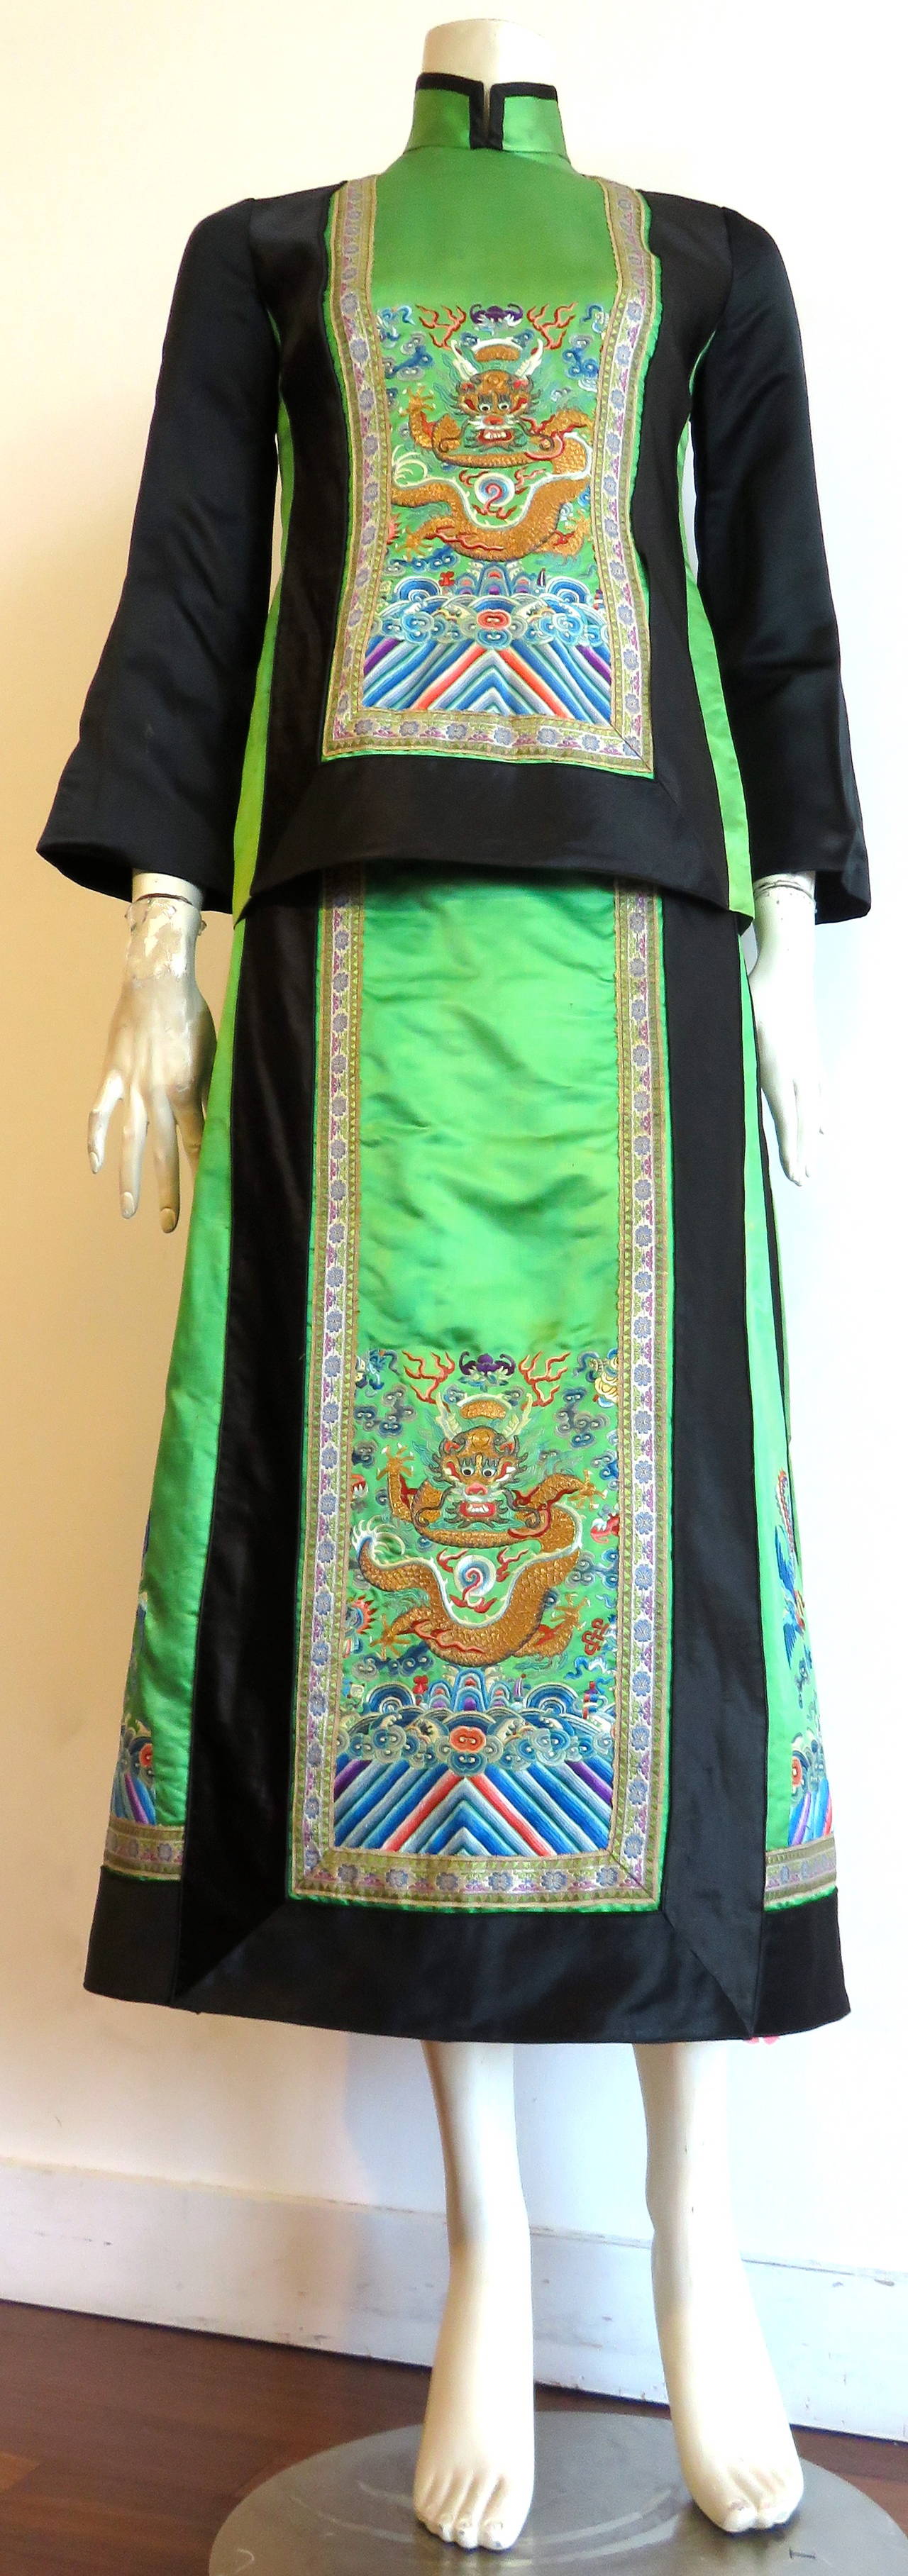 Beautifully constructed Chinese, 2pc., tunic and skirt set in vibrant green, and black silk satin, featuring multicolor embroidery work.

The embroideries, and woven silk fabric were all originally made in China, and the original owner had the